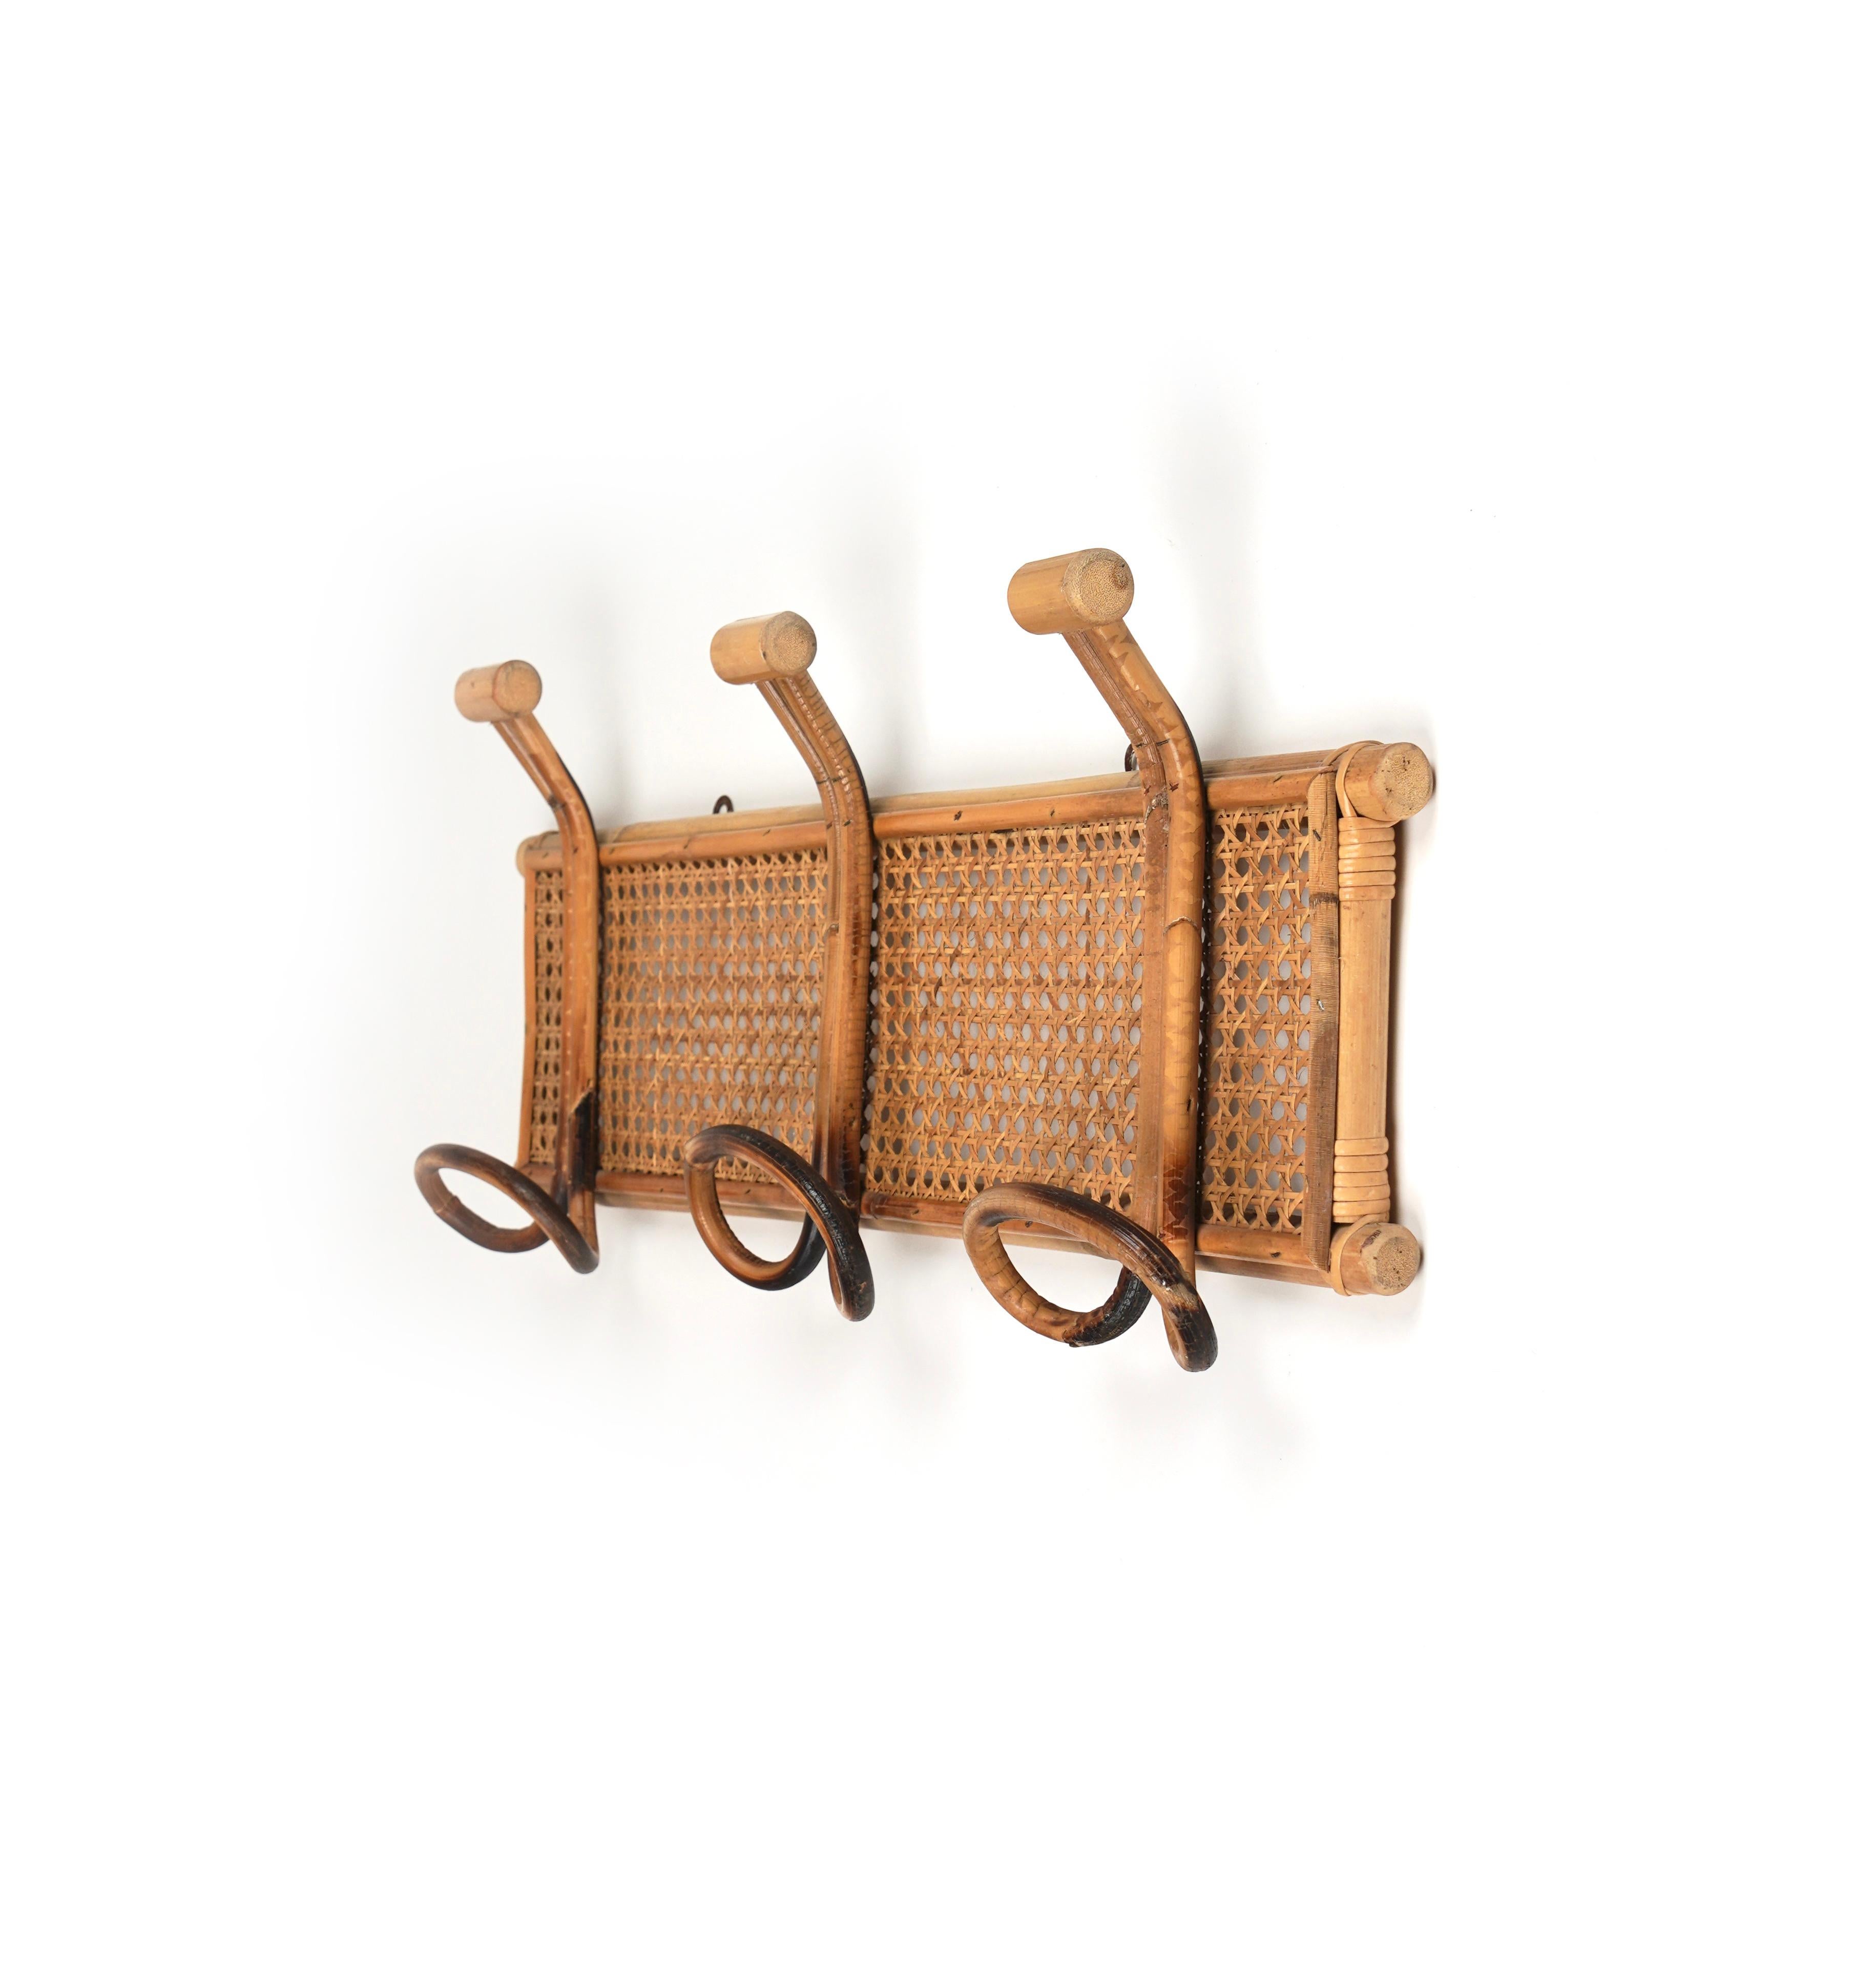 Italian Midcentury Wall Coat Rack in Bamboo and Rattan, Italy 1970s For Sale